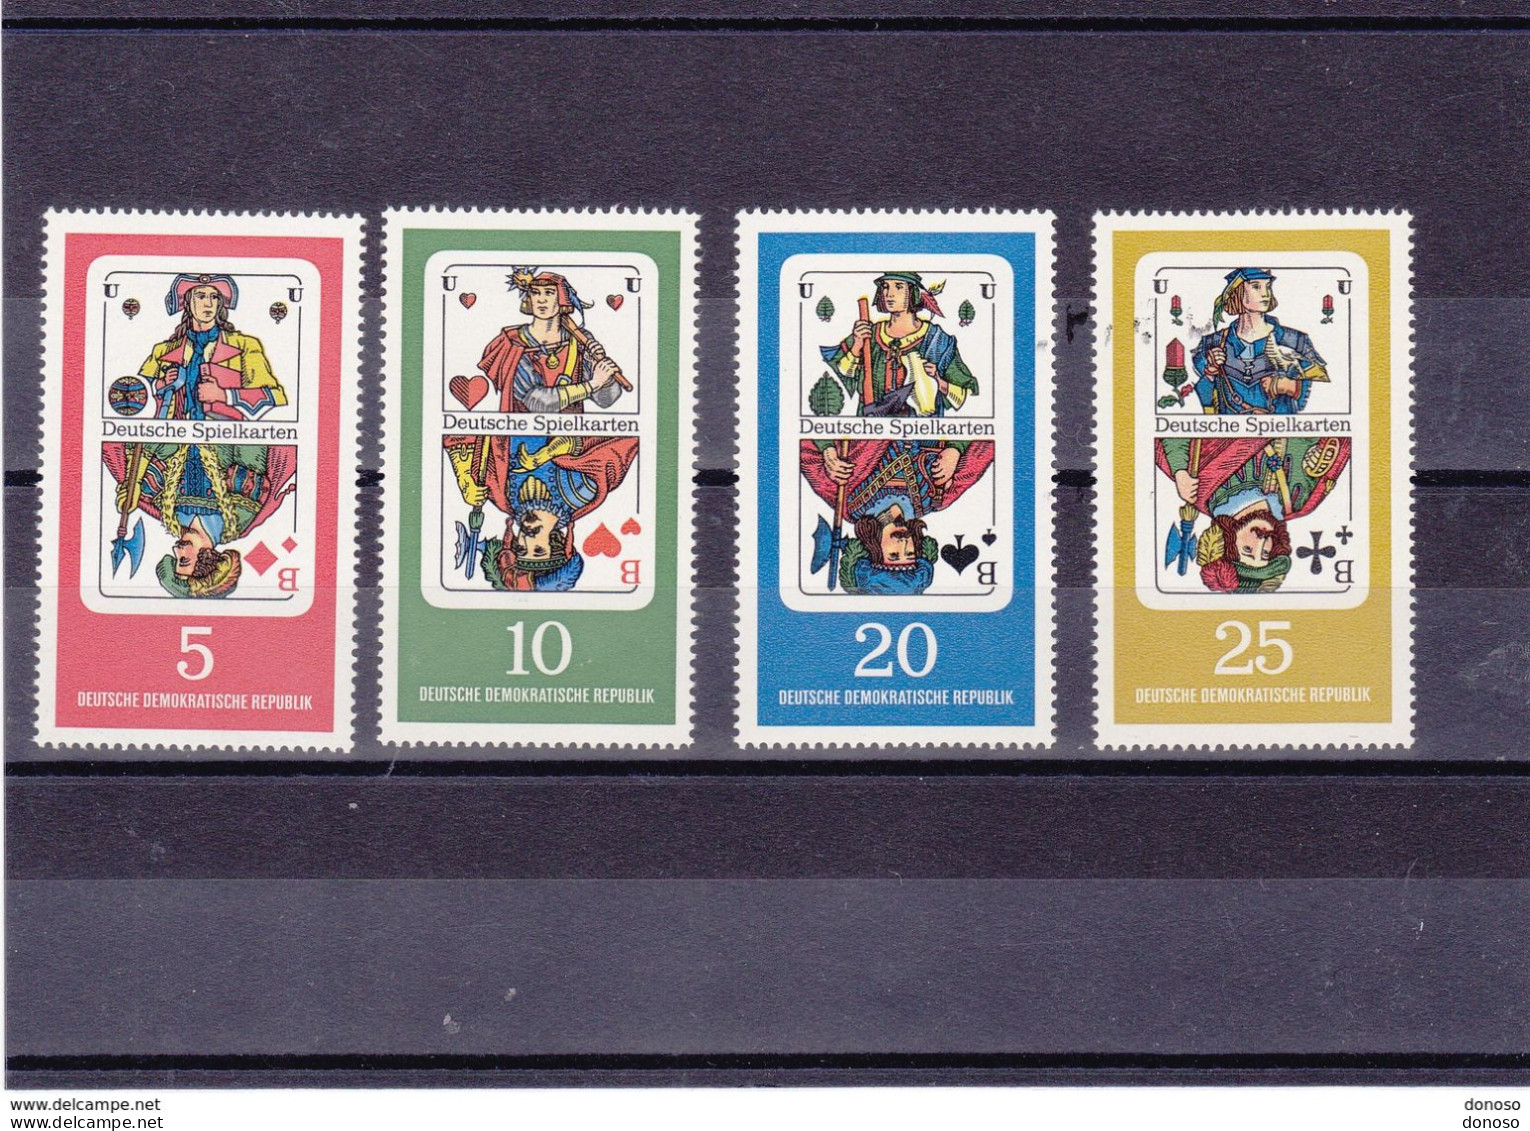 RDA 1967 CARTES A JOUER Yvert 995-998, Michel 1298-1301 NEUF** MNH Cote Yv 9 Euros - Unused Stamps